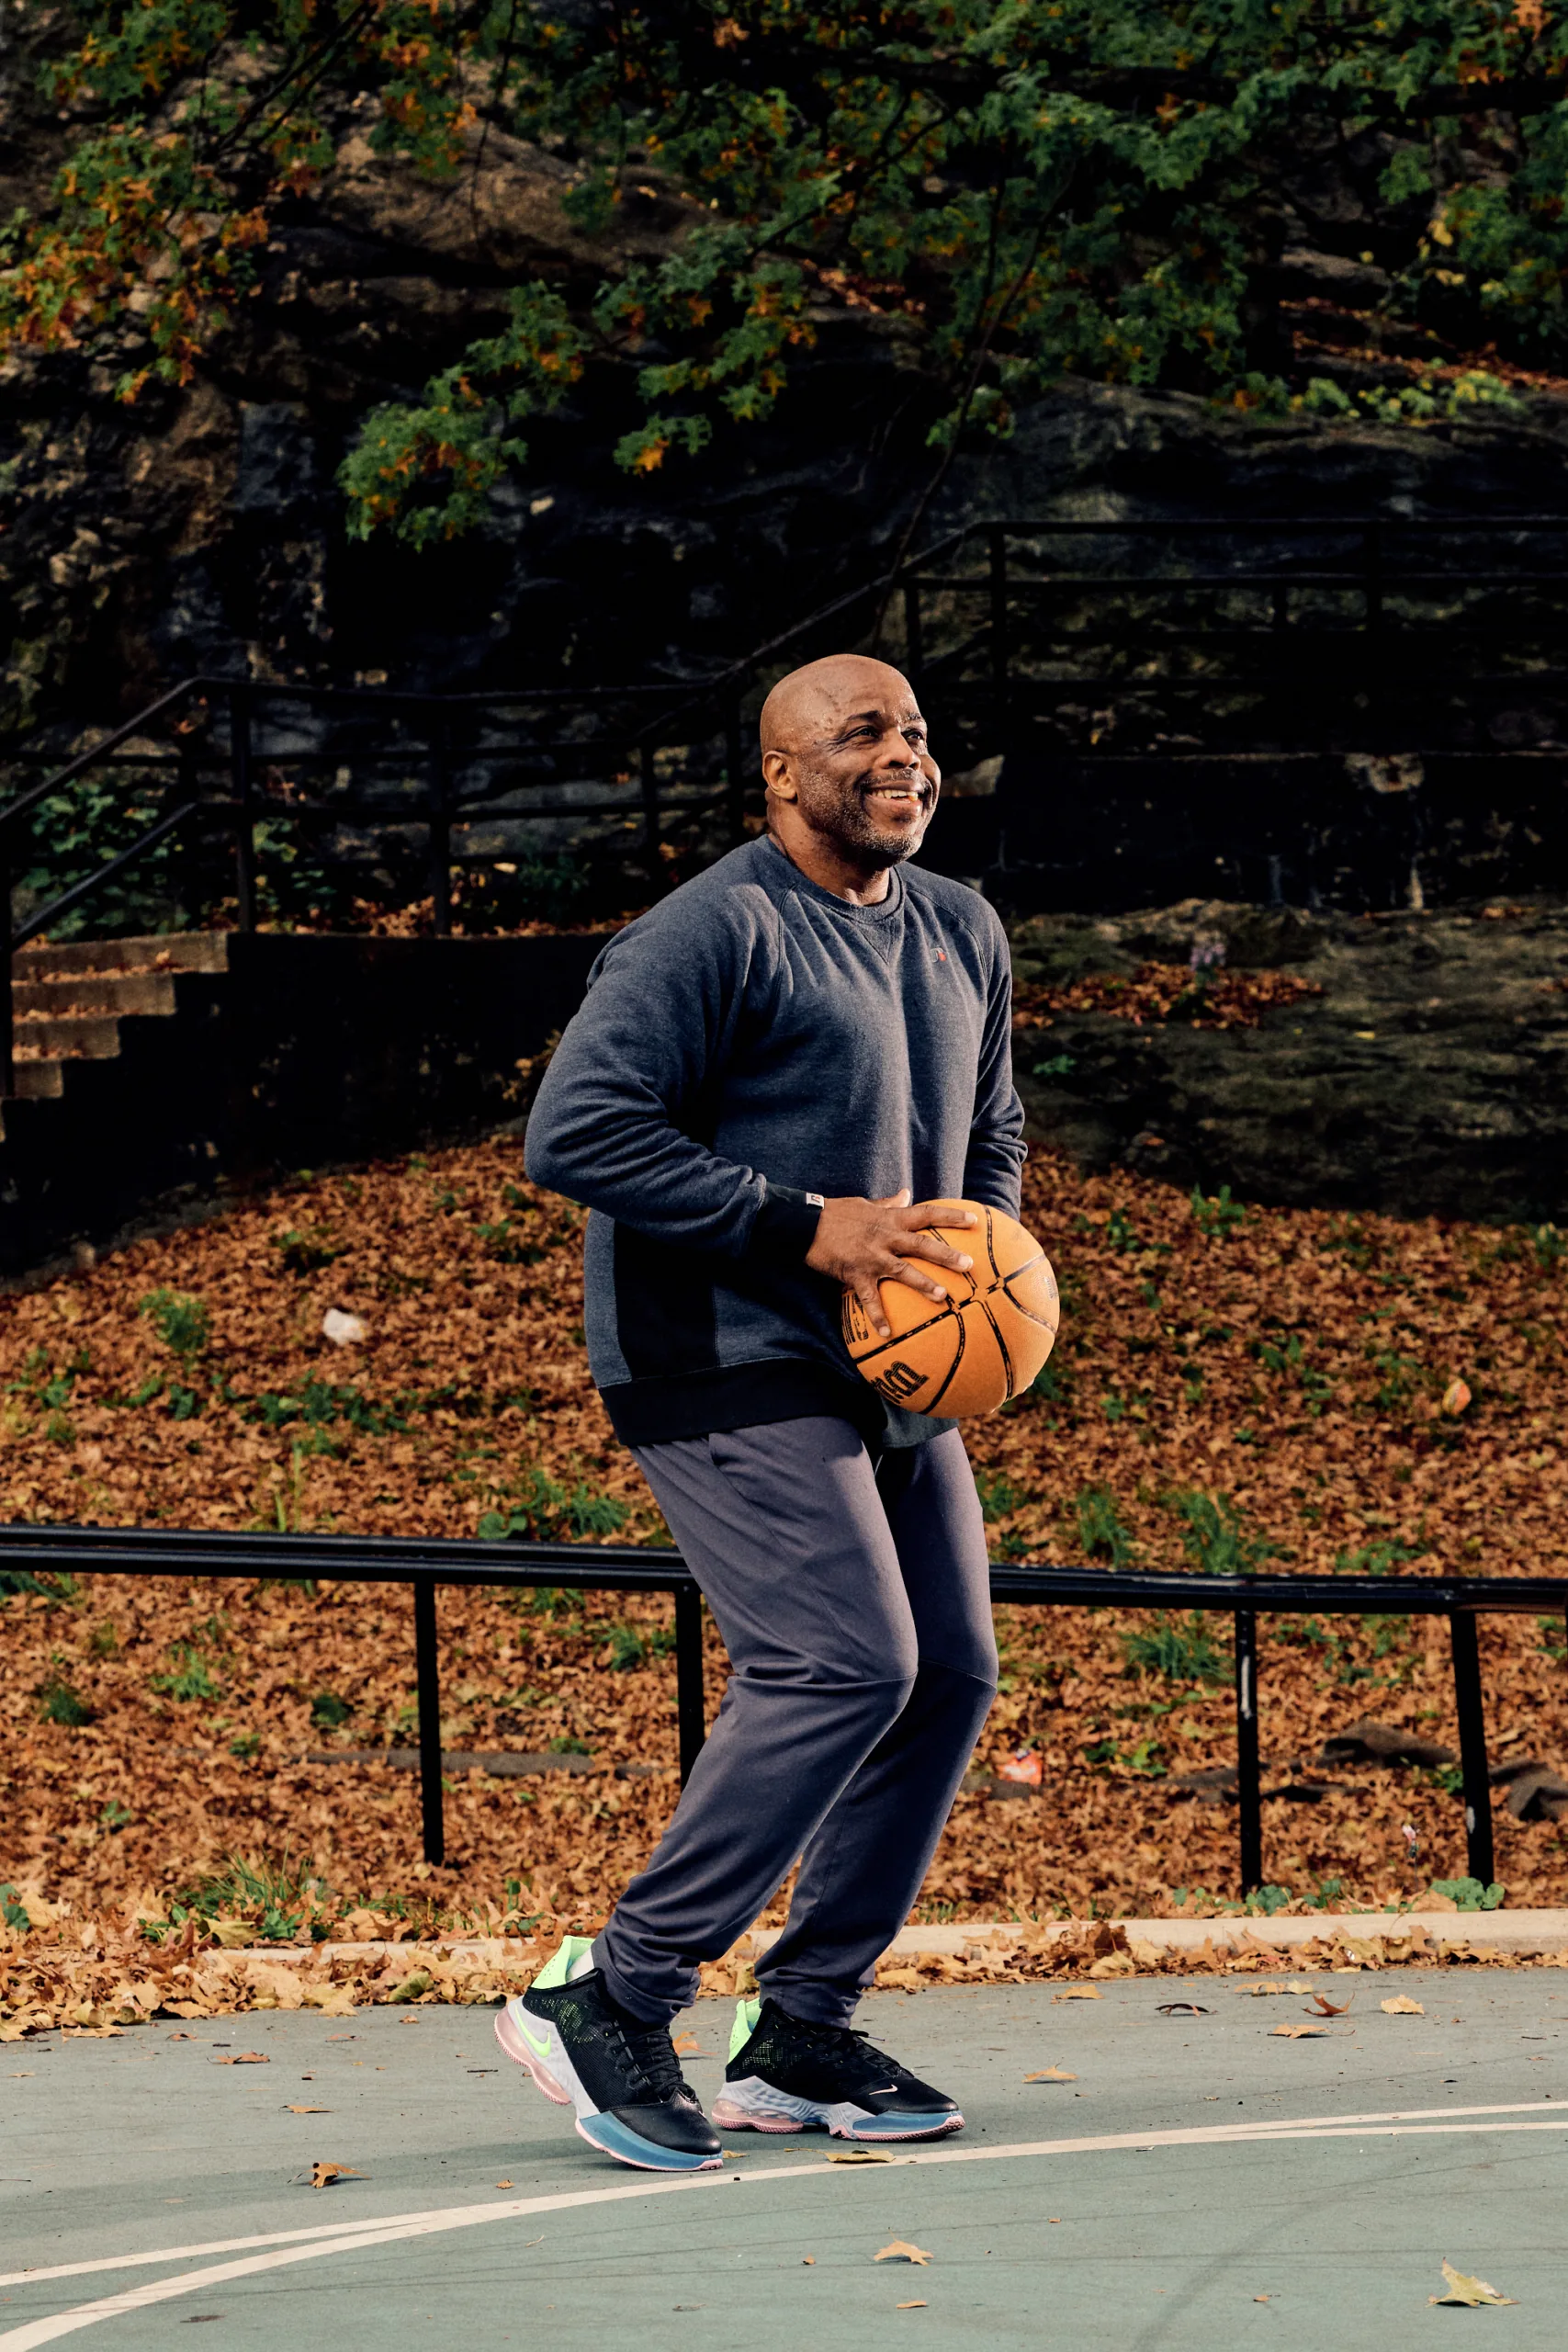 Norberto Peets playing basketball in New York City. (Image: Christian Rodriguez/Innocence Project)